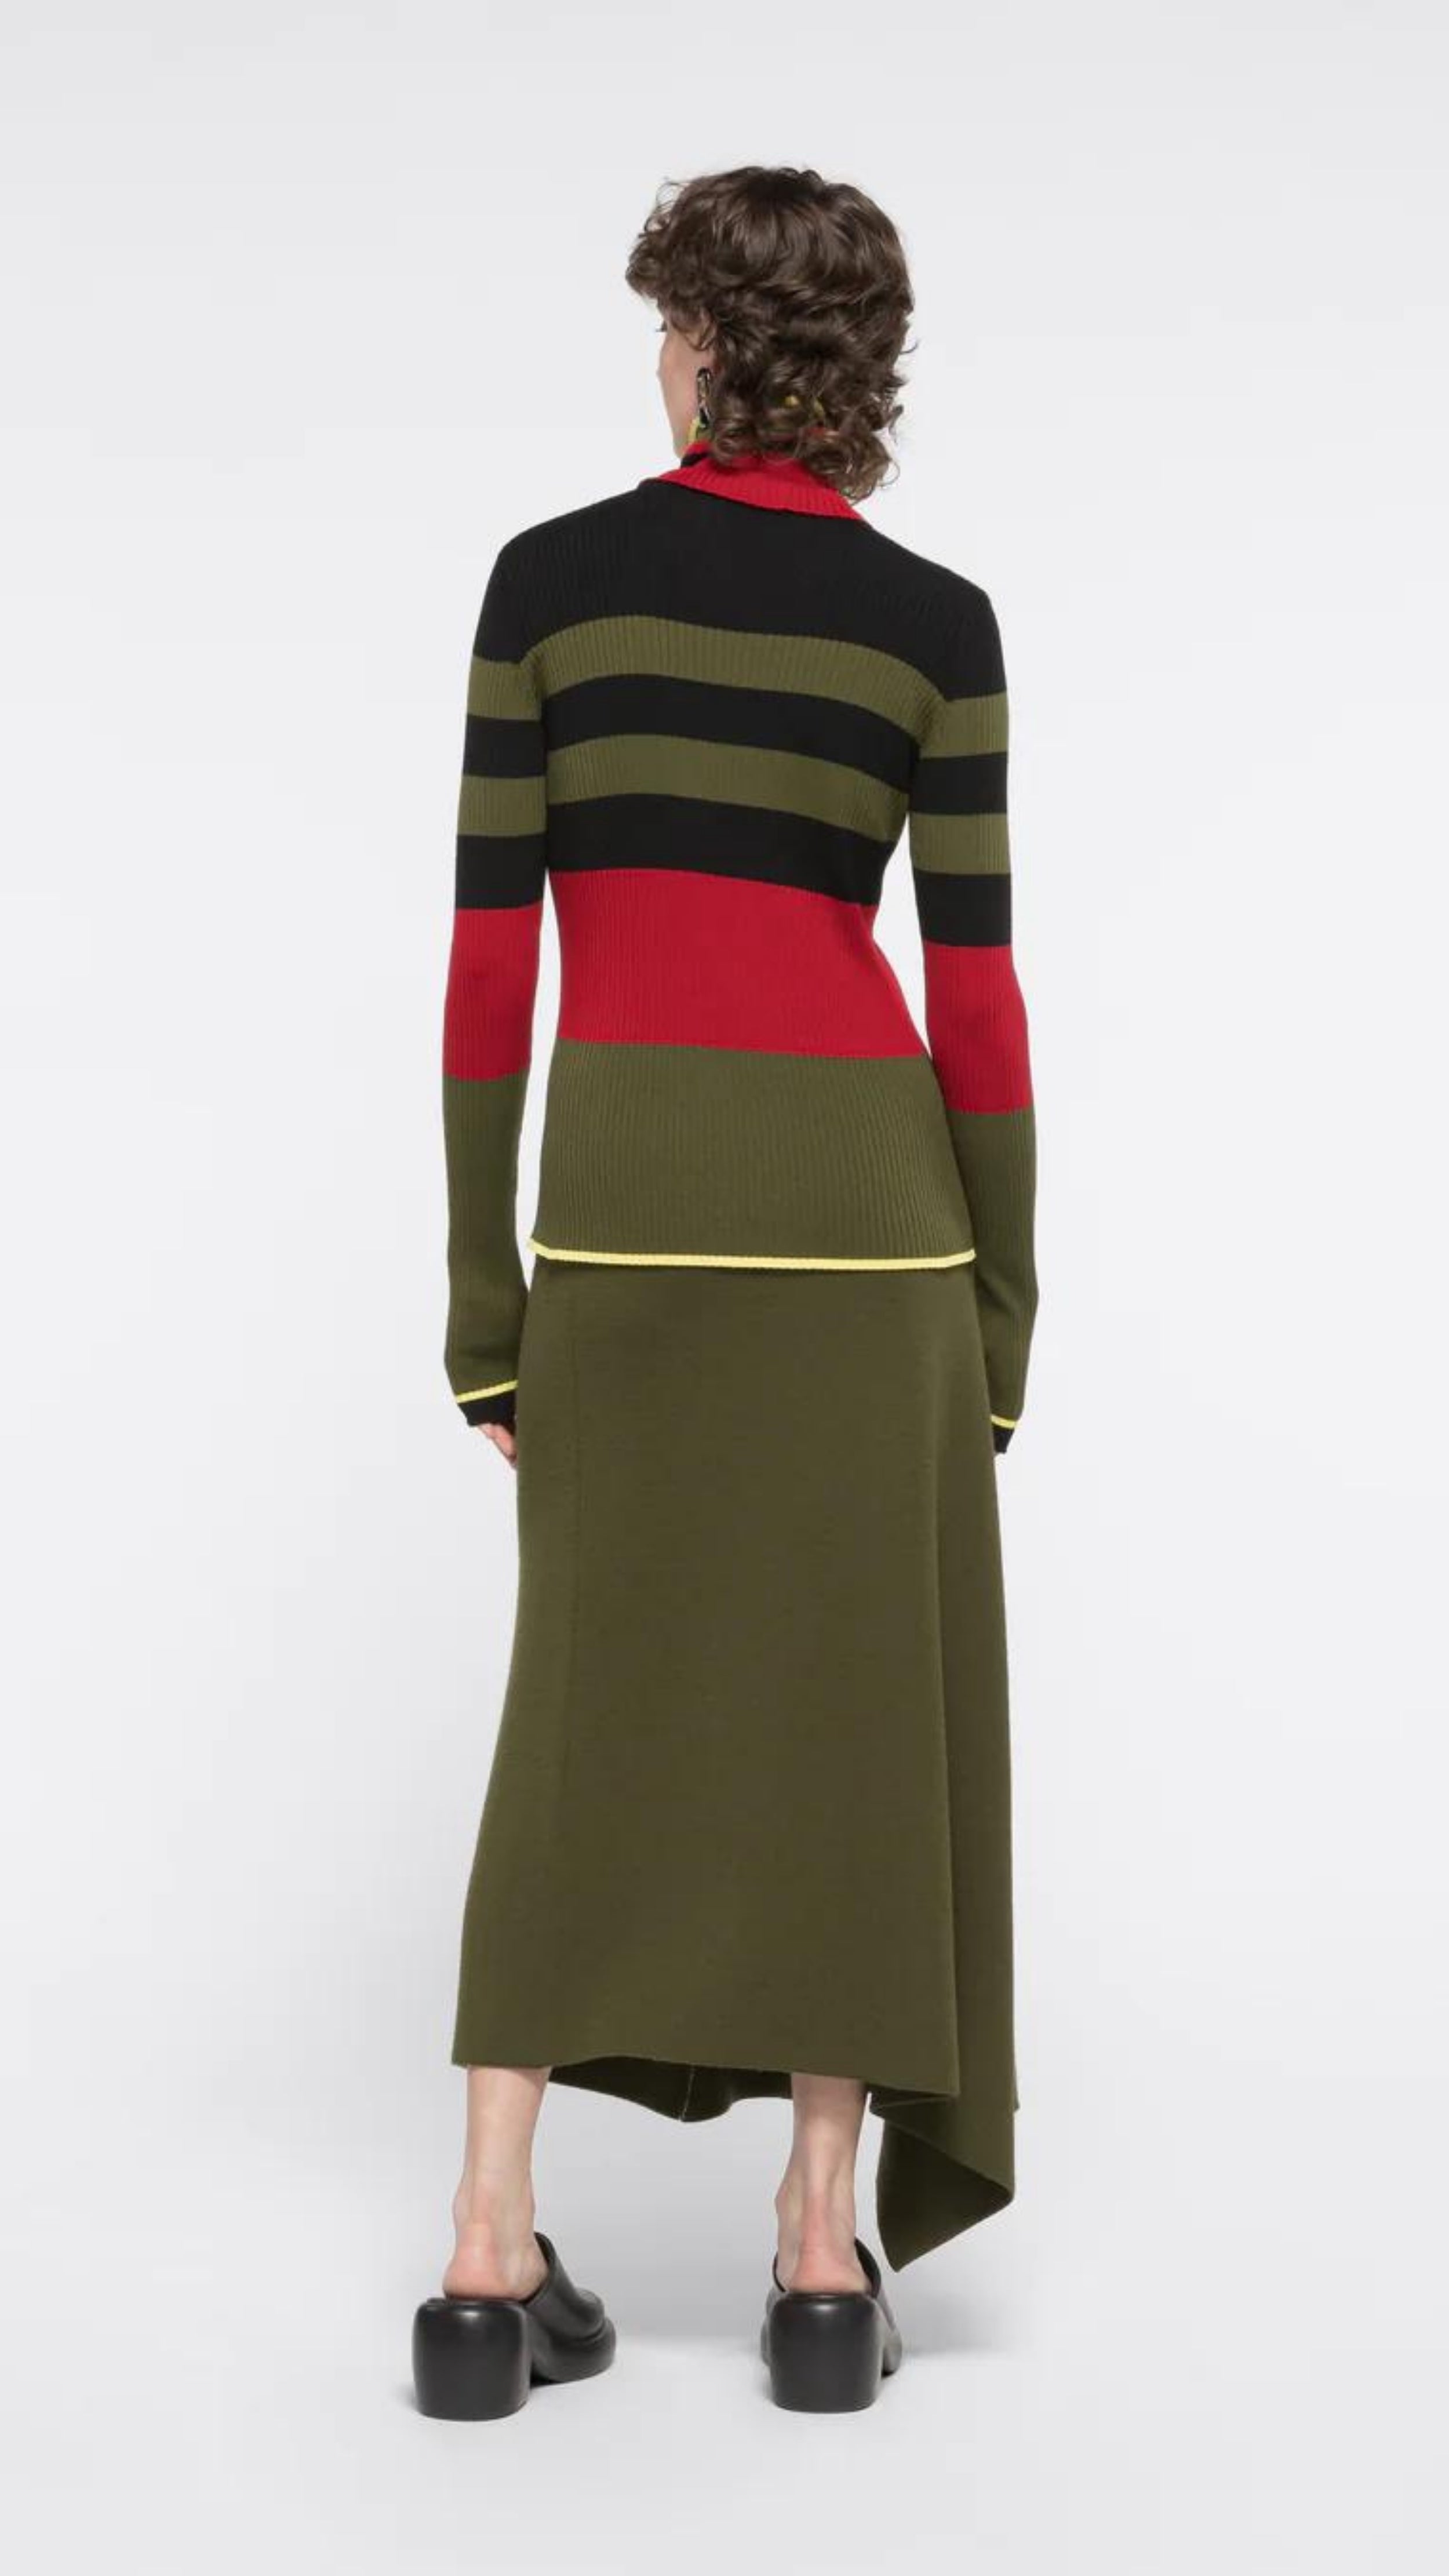 Colville AZ Factory Molly Molloy and Lucinda Chambers, Color Block Crewneck Sweater with Snood. Long sleeve sweater with crew neckline in varying stripes of black, olive and red with high light of yellow at bottom hem and cuffs. Shown on Model facing back.